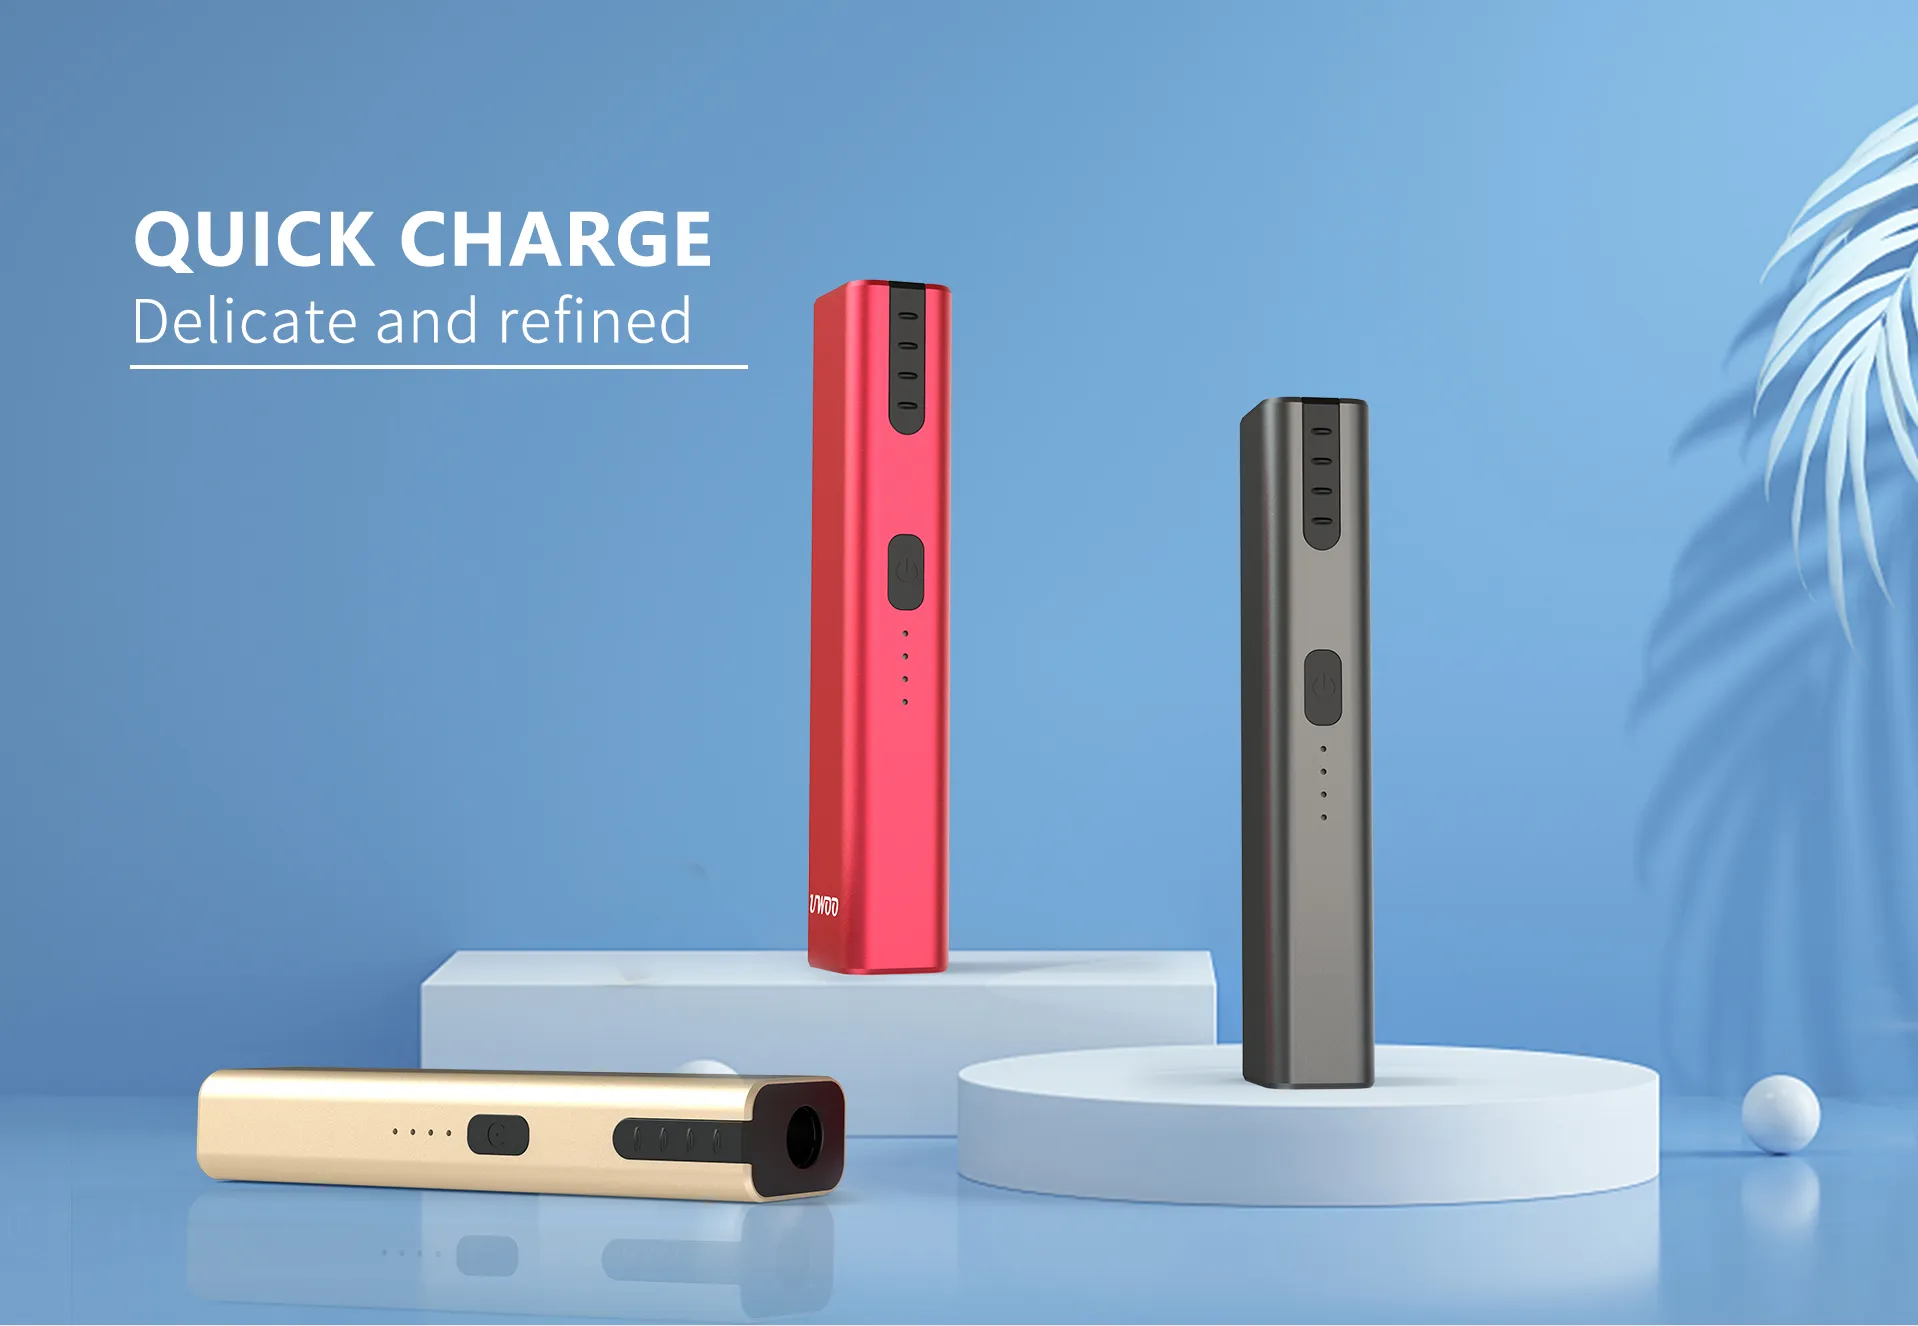 QUICK CHARGE Delicate and refined